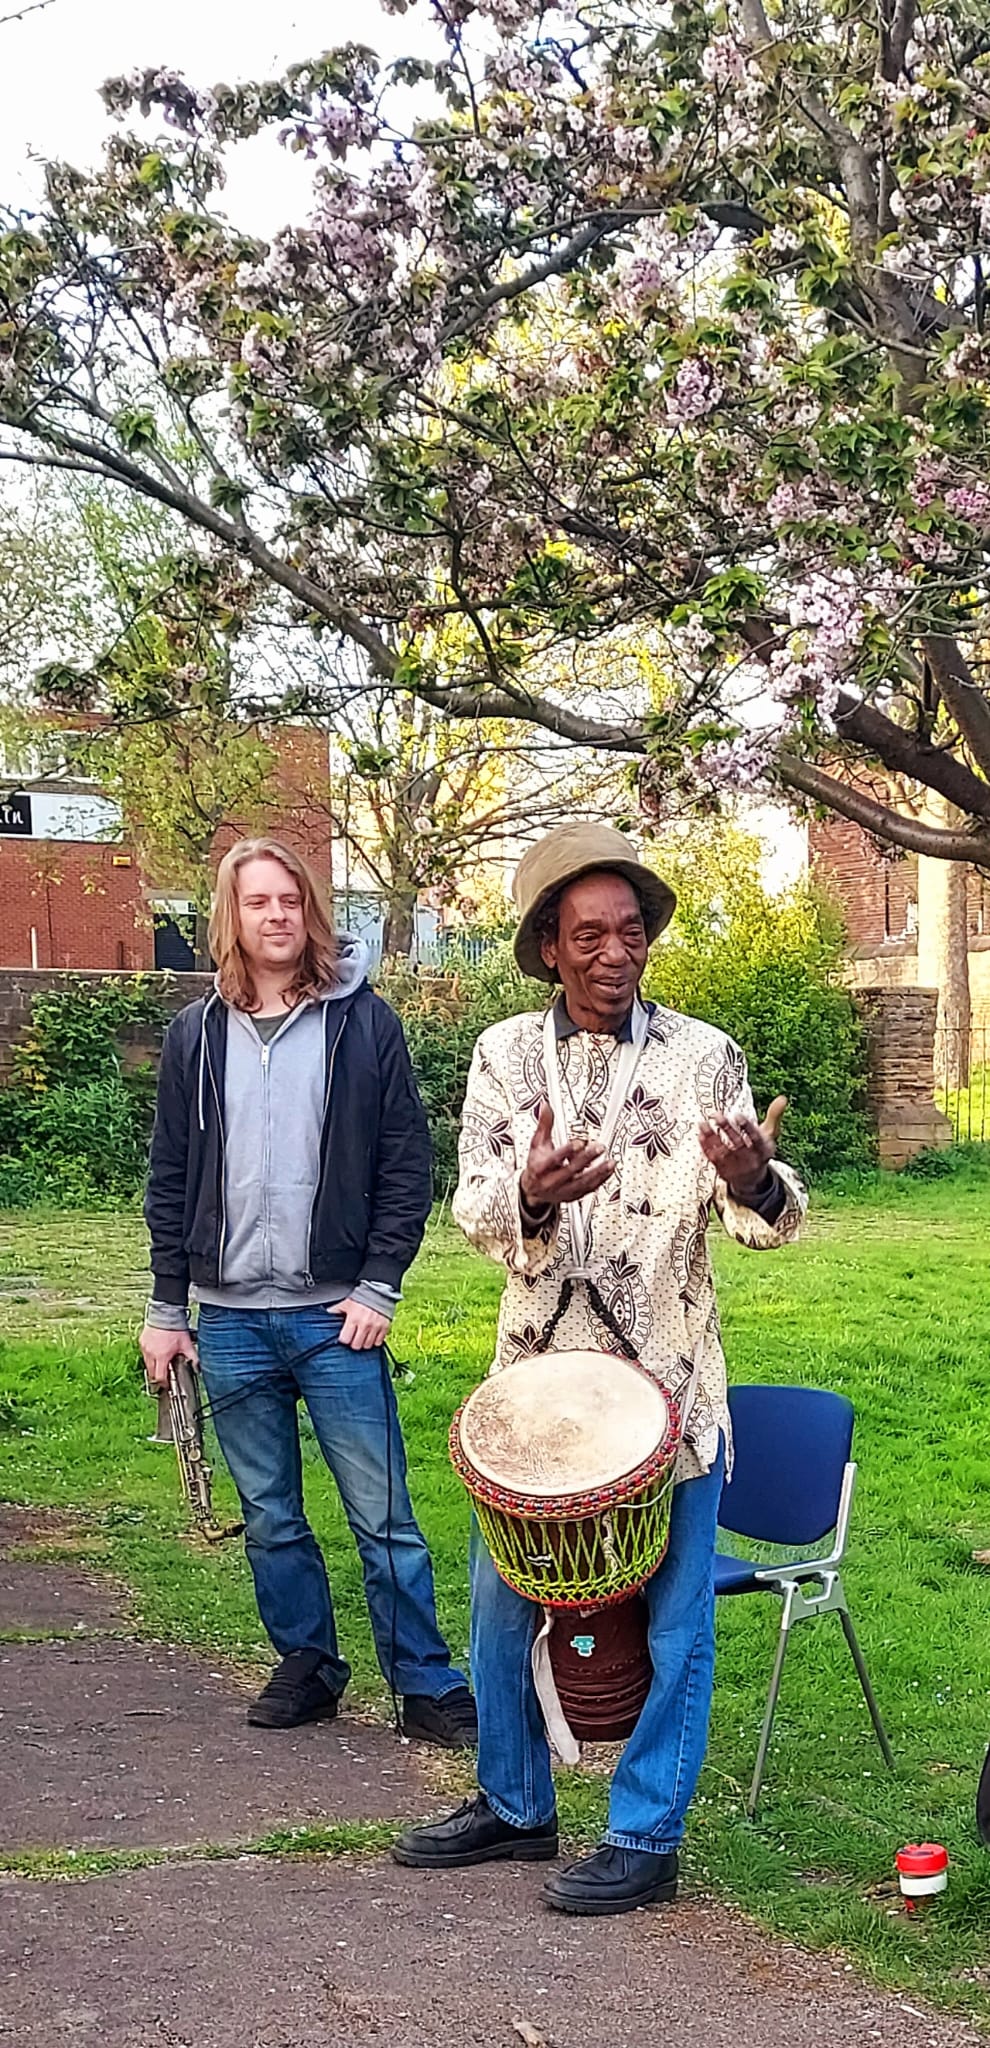 Alex with his Djeme talking and Dave behind with his saxaphone in Christ Church Gardens